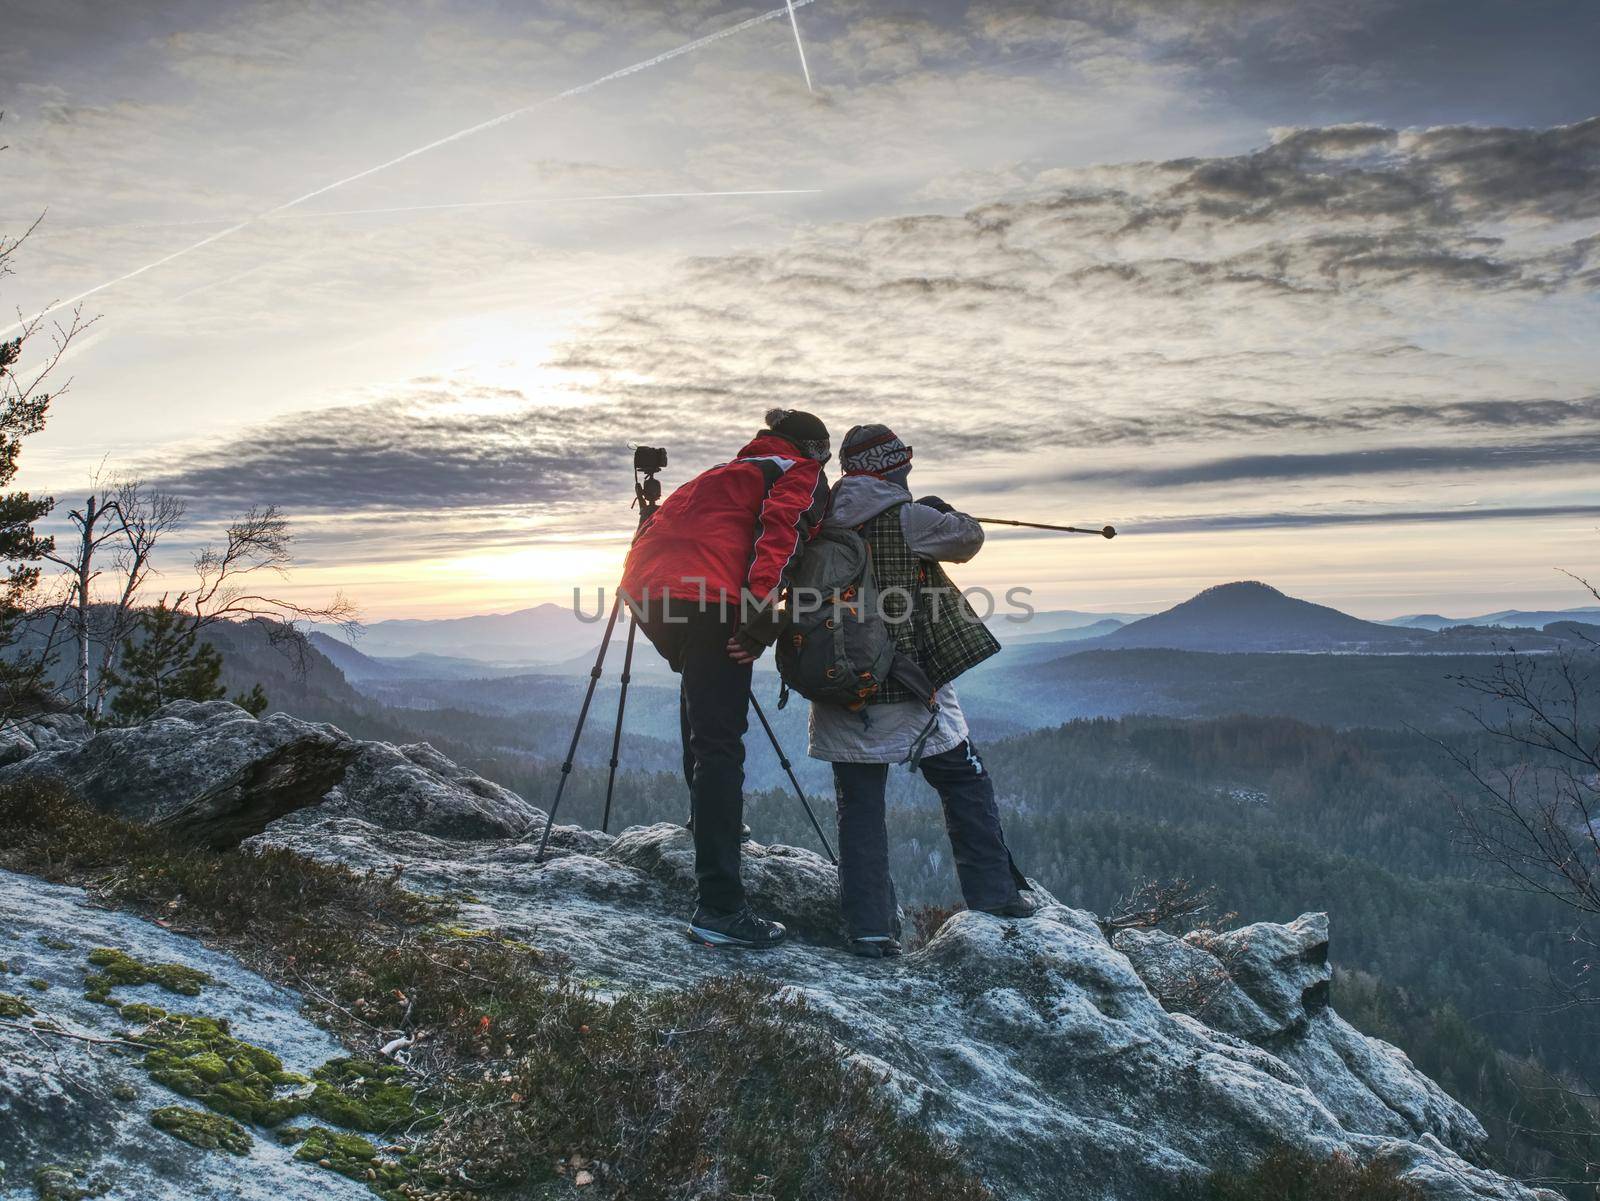 Couple  enjoy photographying in wild nature. Nature photographer with big camera on tripod stay on summit rock. Listen to muse.